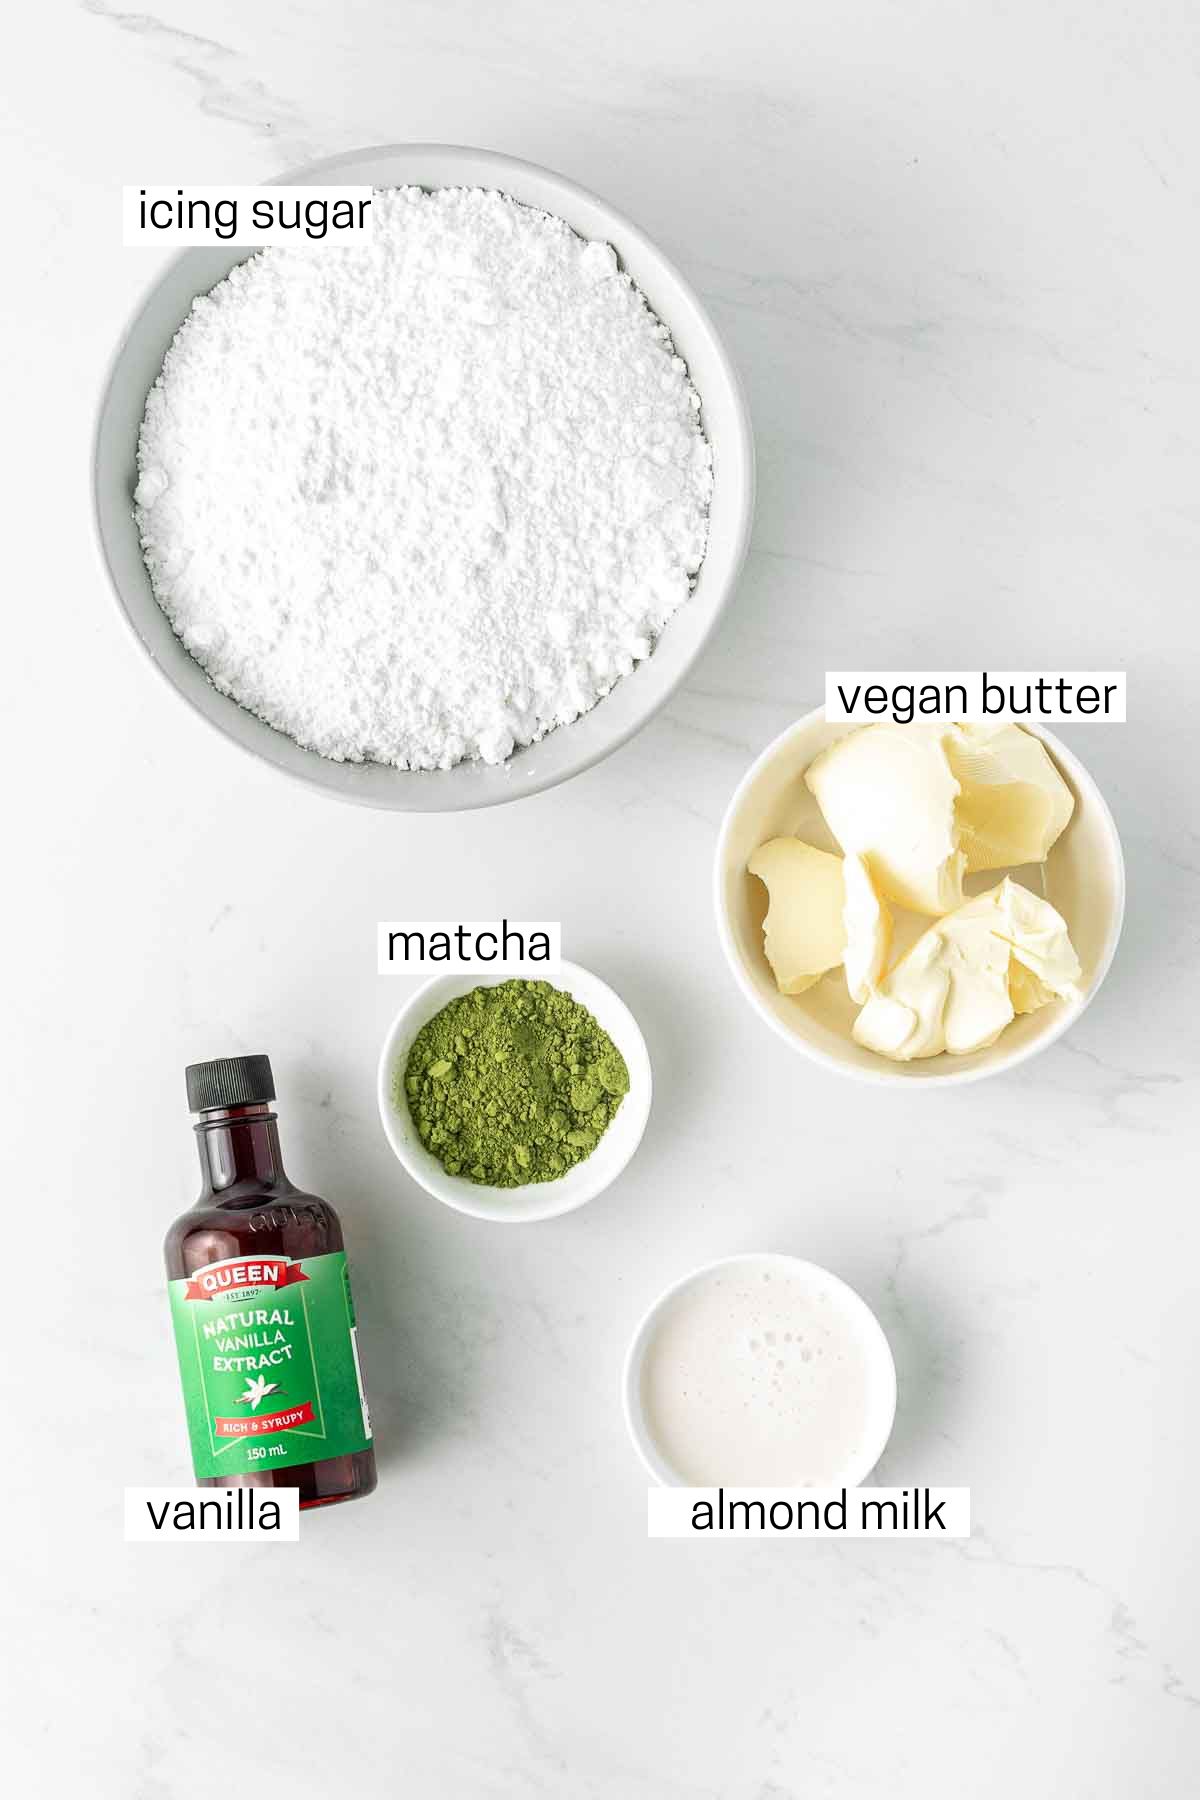 All ingredients needed for the matcha buttercream laid out in small bowls.